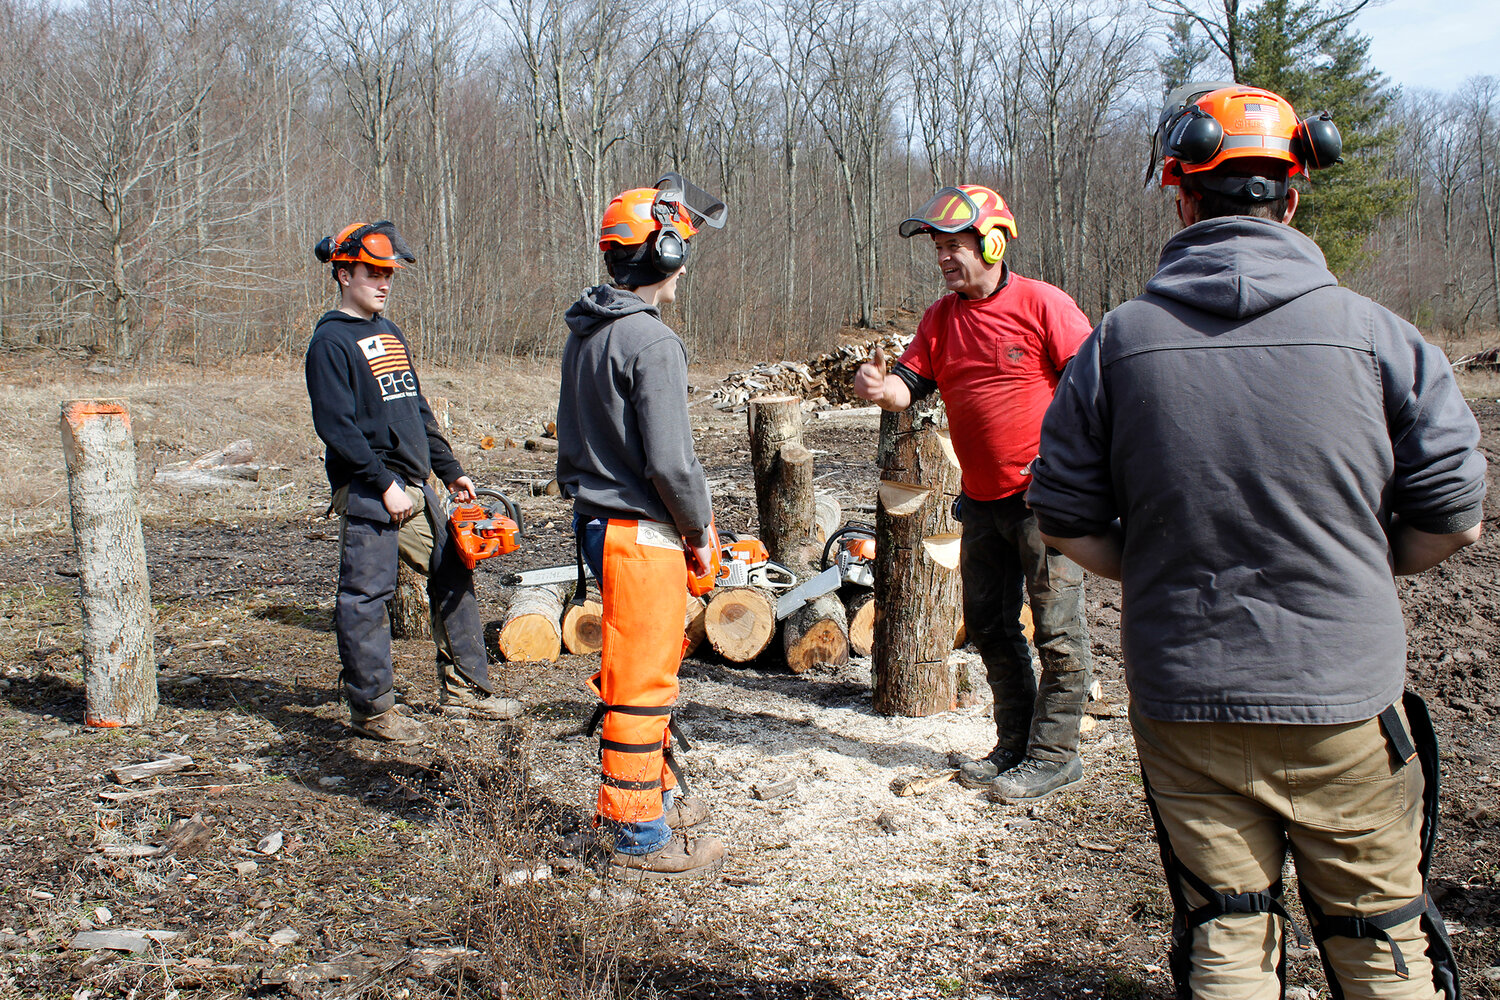 Student Jacob Butts gets the “thumbs up” from Game of Logging instructor Bill Lindloff for his efforts during a chainsaw skills workshop at the DCMO BOCES Harrold Campus last week as Students Aiden Ross and Thomas Breslau look on.